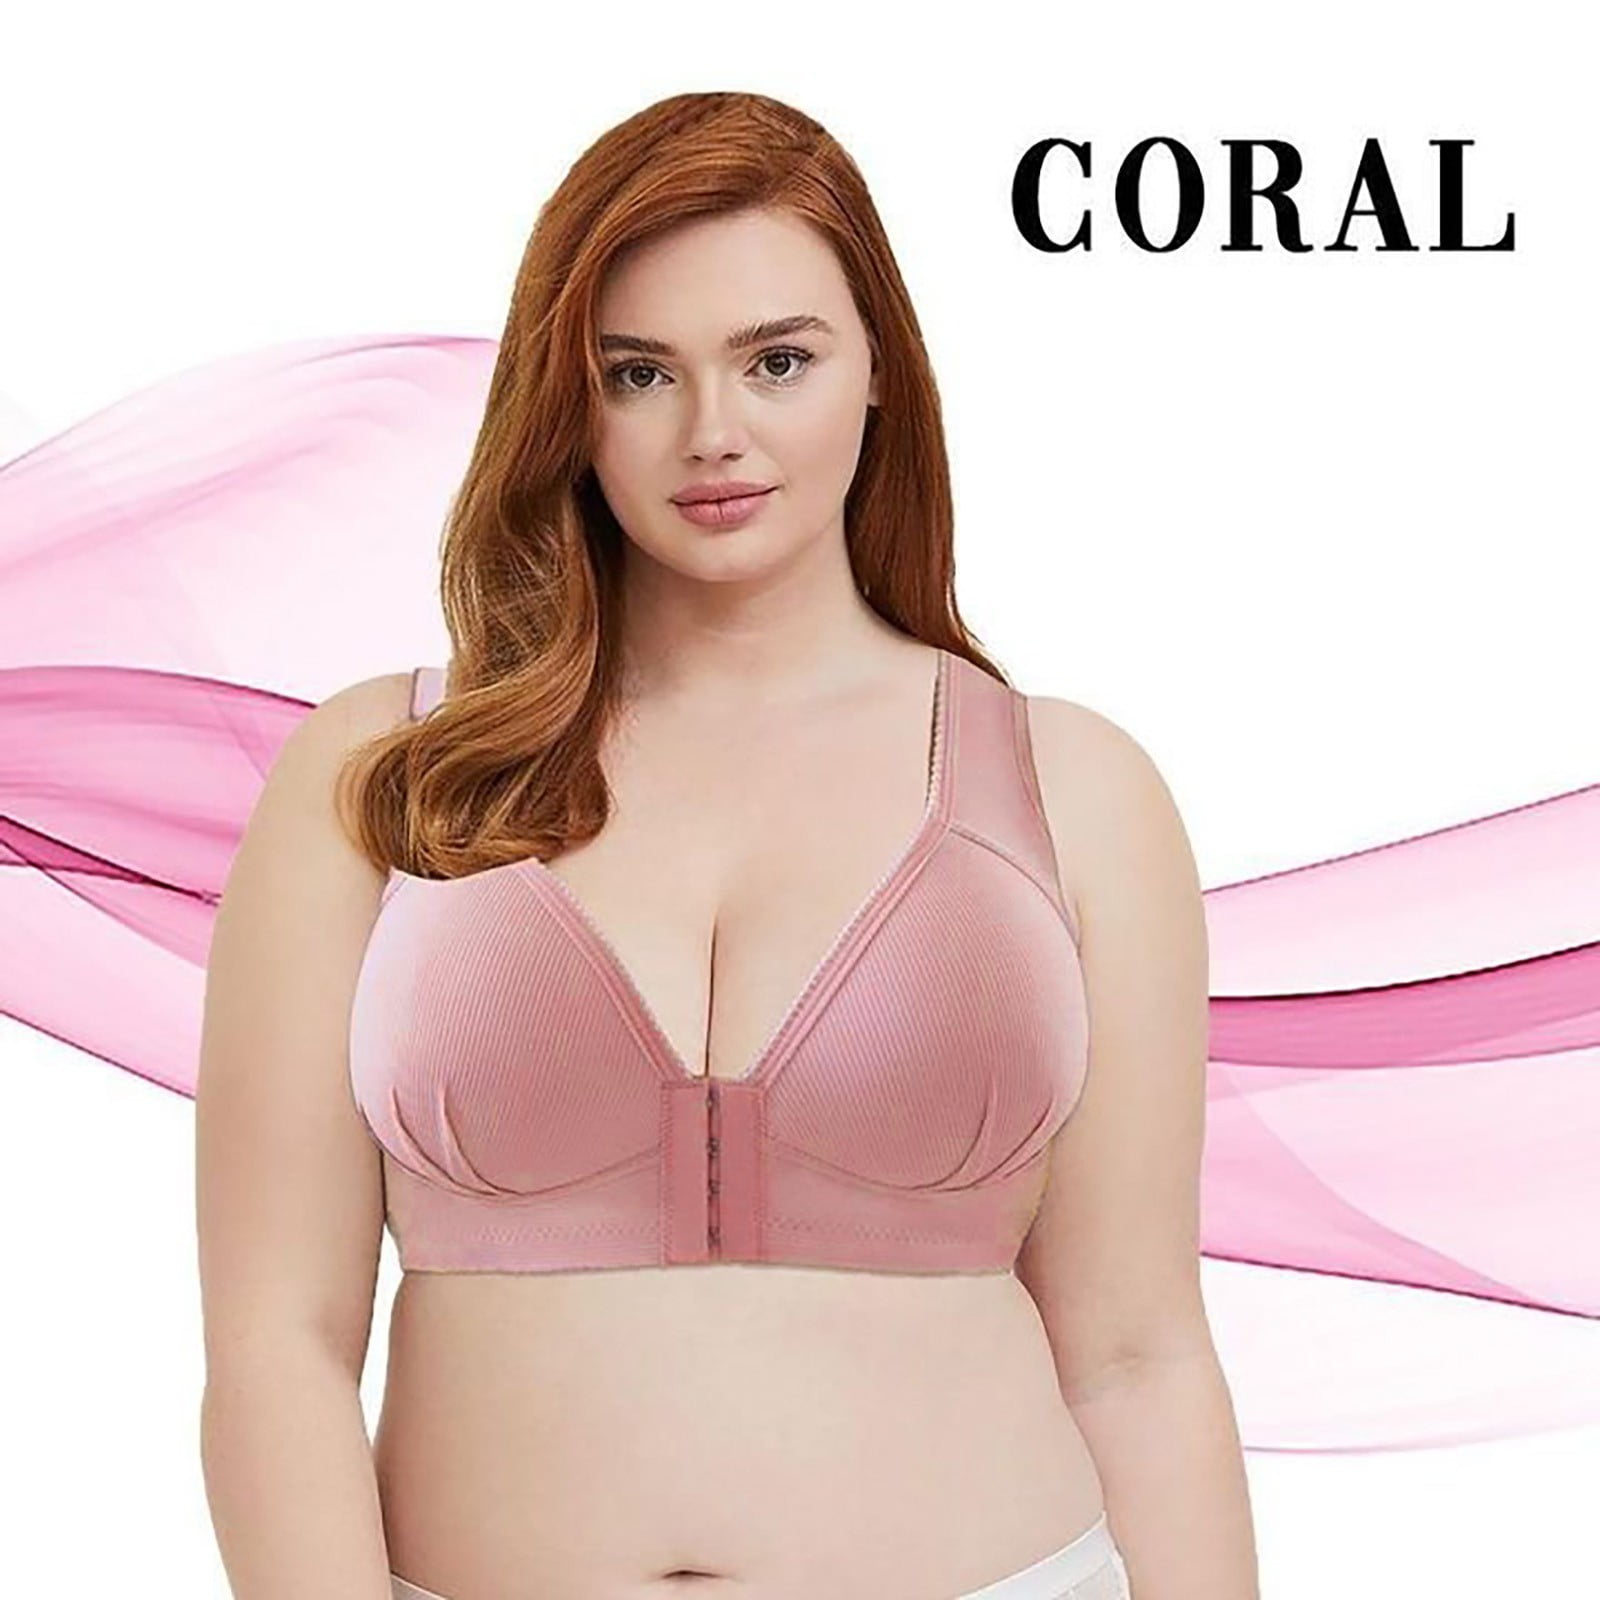 Full Figure Figure Types in 36C Bra Size B Cup Sizes Berry Contour, Lace Cup  and T-Shirt Bras